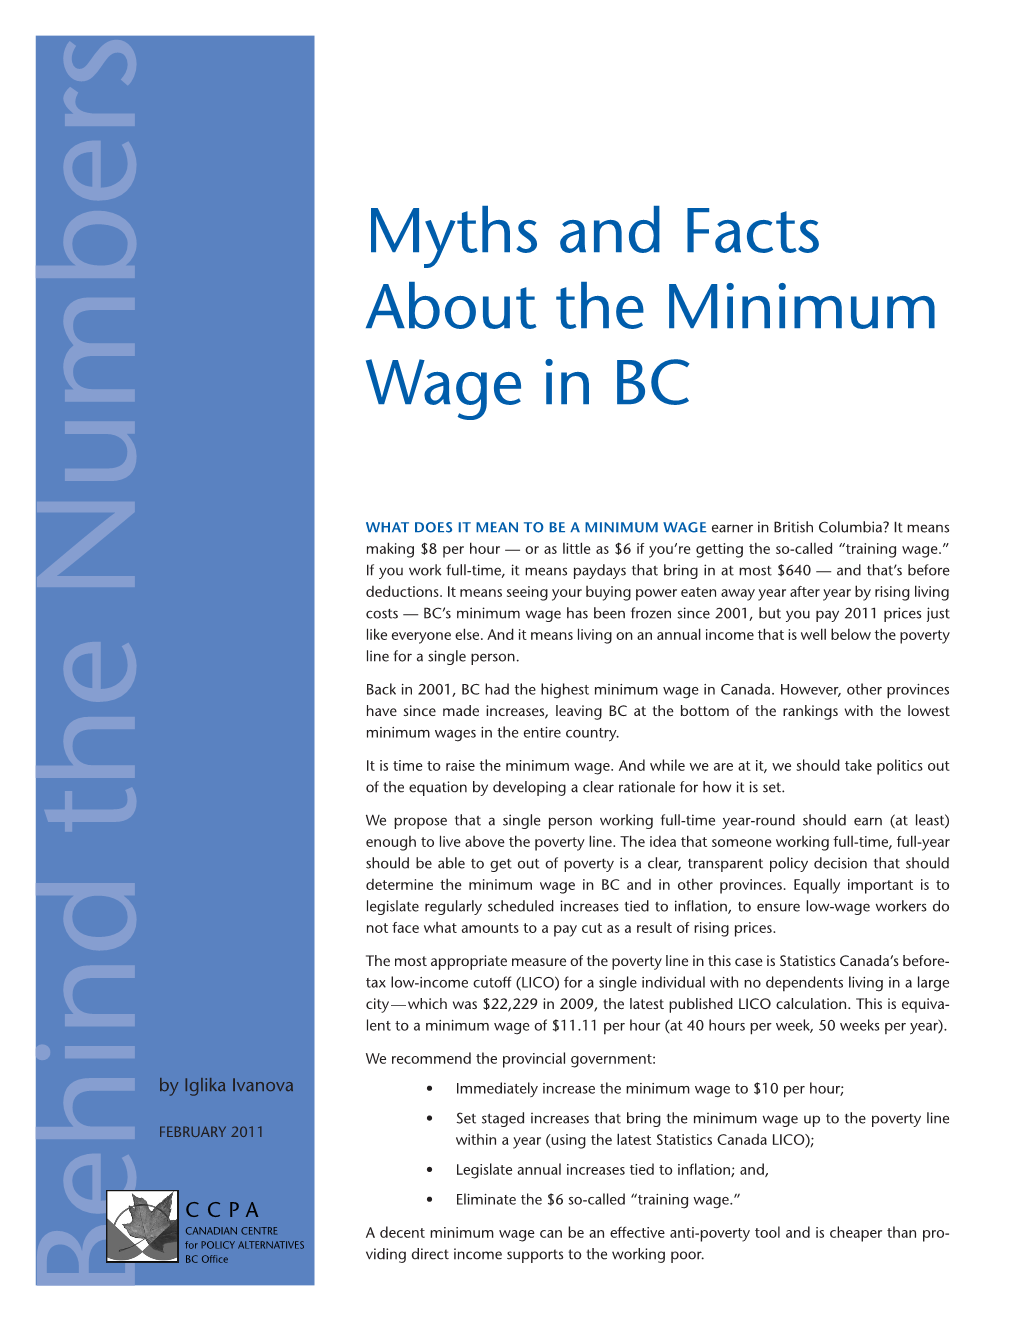 Myths and Facts About the Minimum Wage in BC We Can Avoid the Need for Large One-Time Increases in the Future Simply by Indexing the Minimum Wage to Inflation